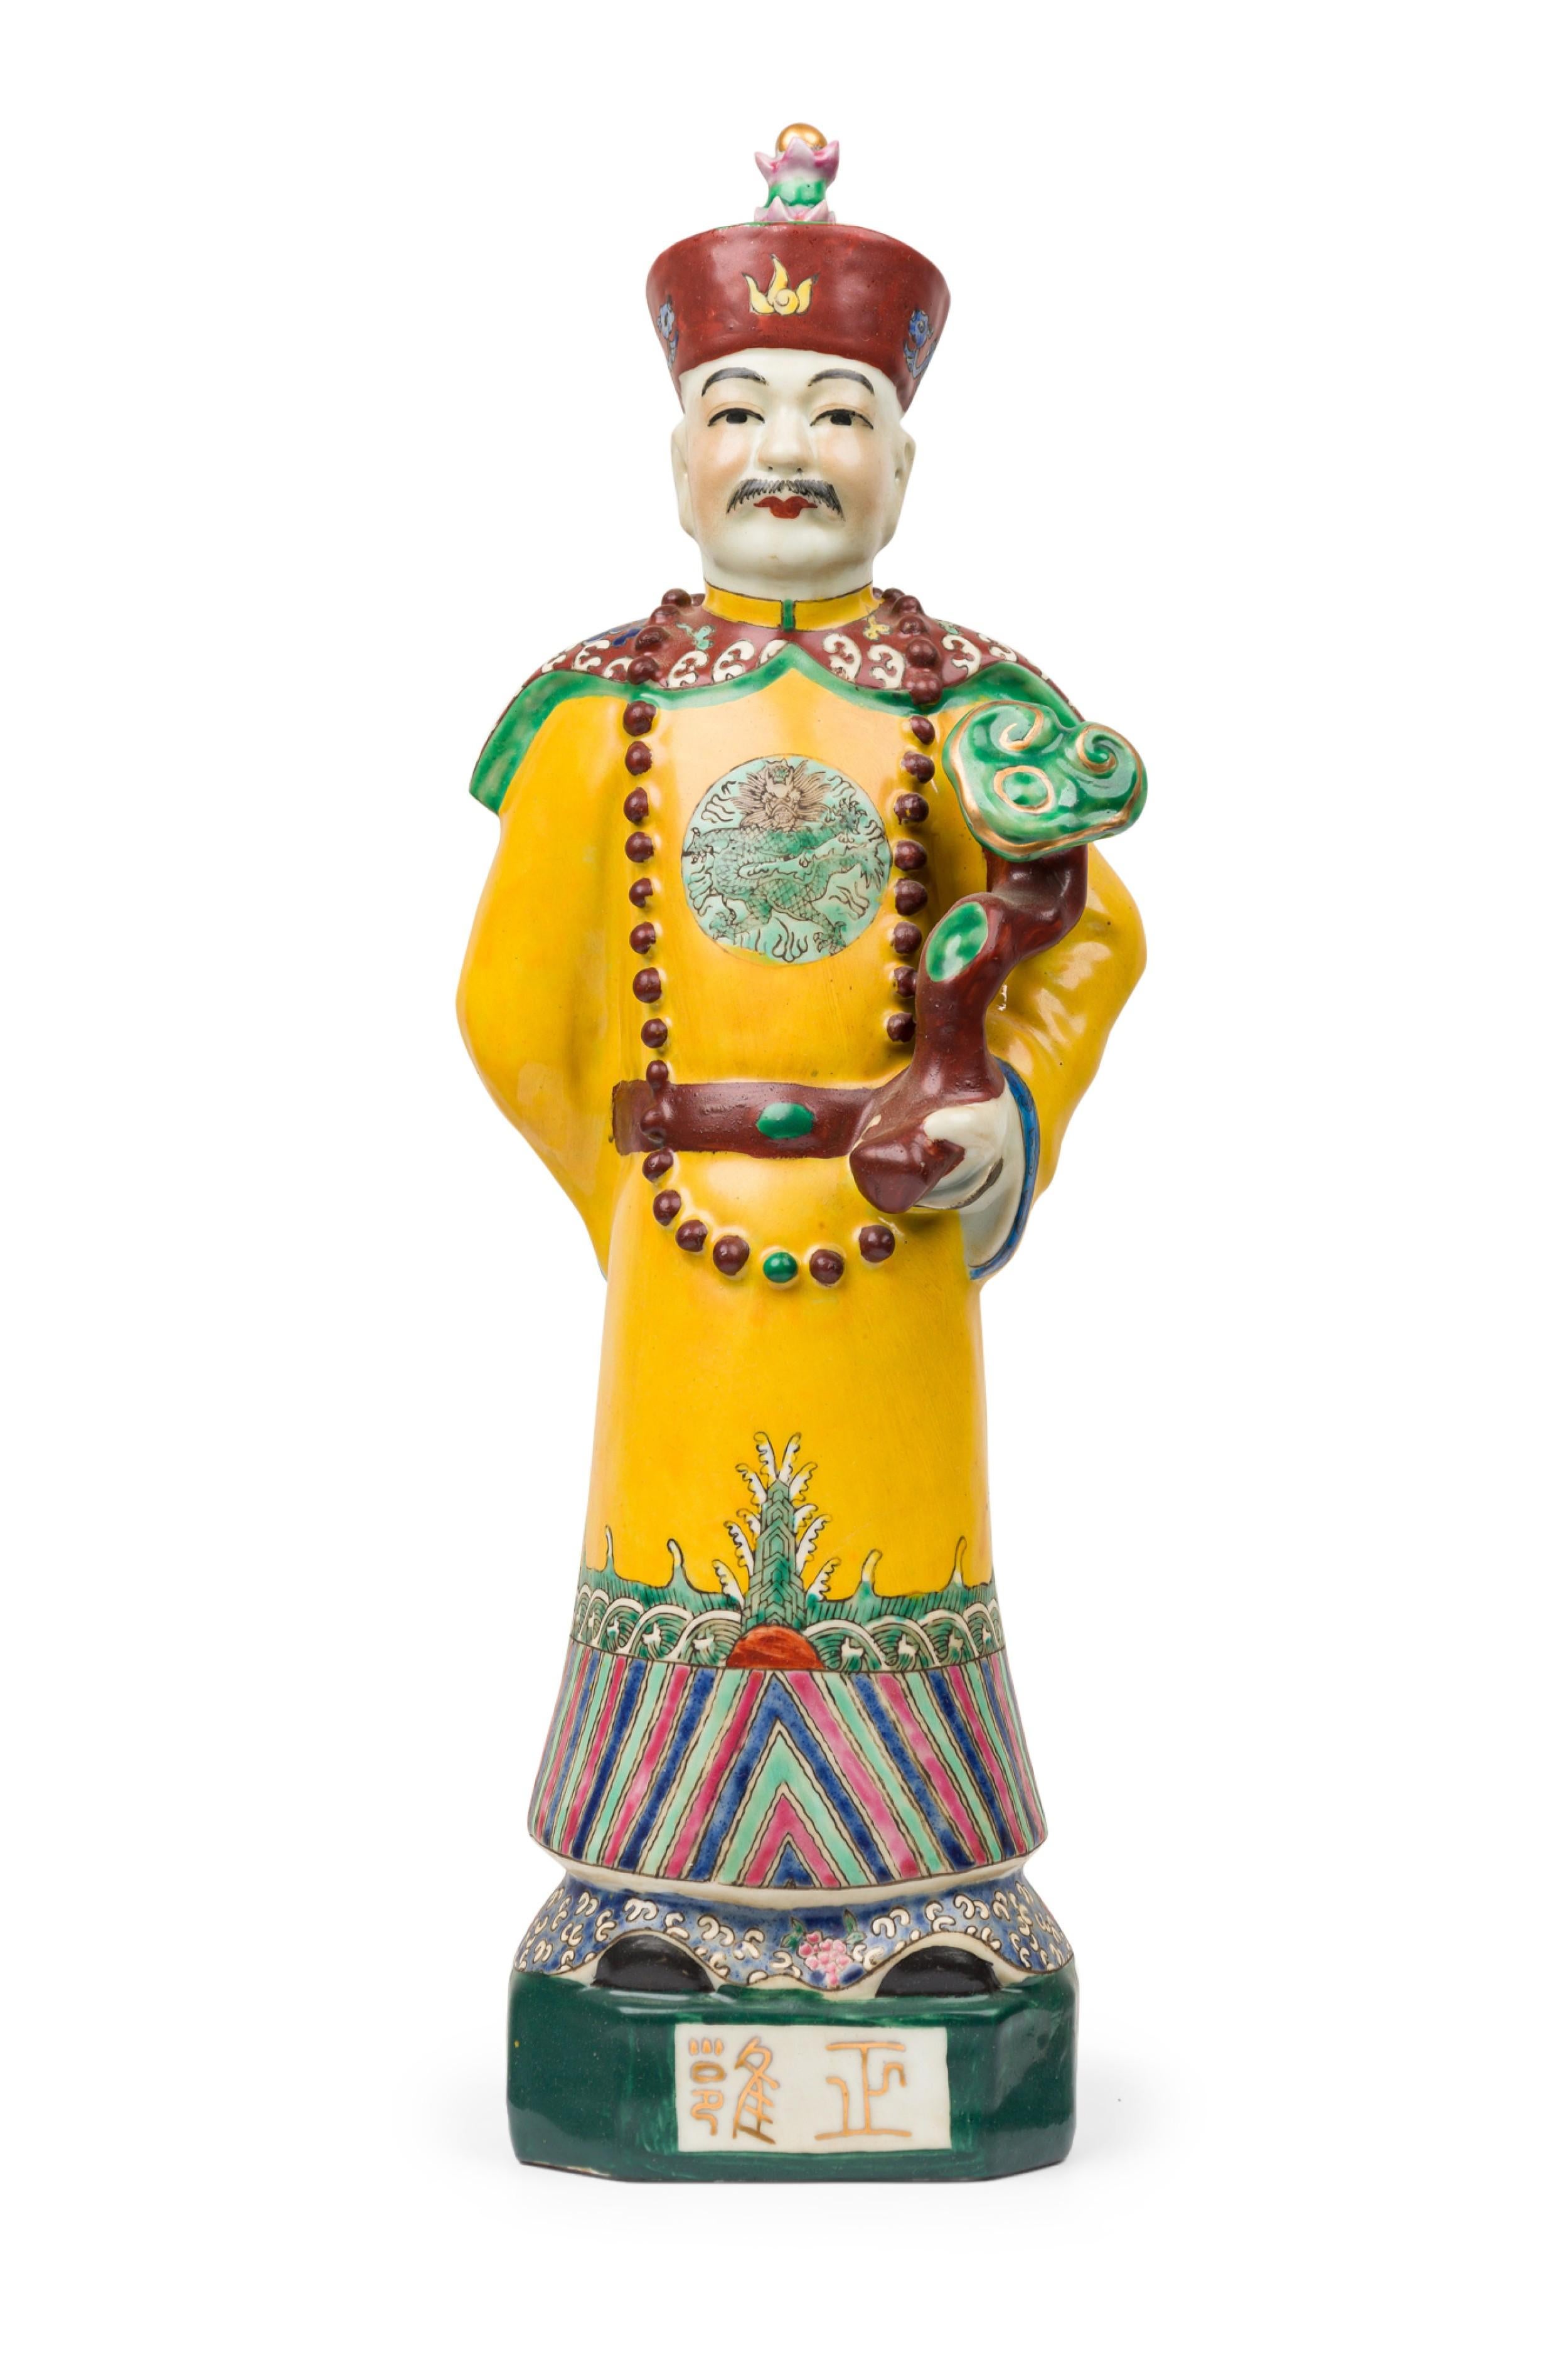 Pair of Chinese Painted Ceramic Figures Depicting a Yellow Robed Emperor For Sale 13